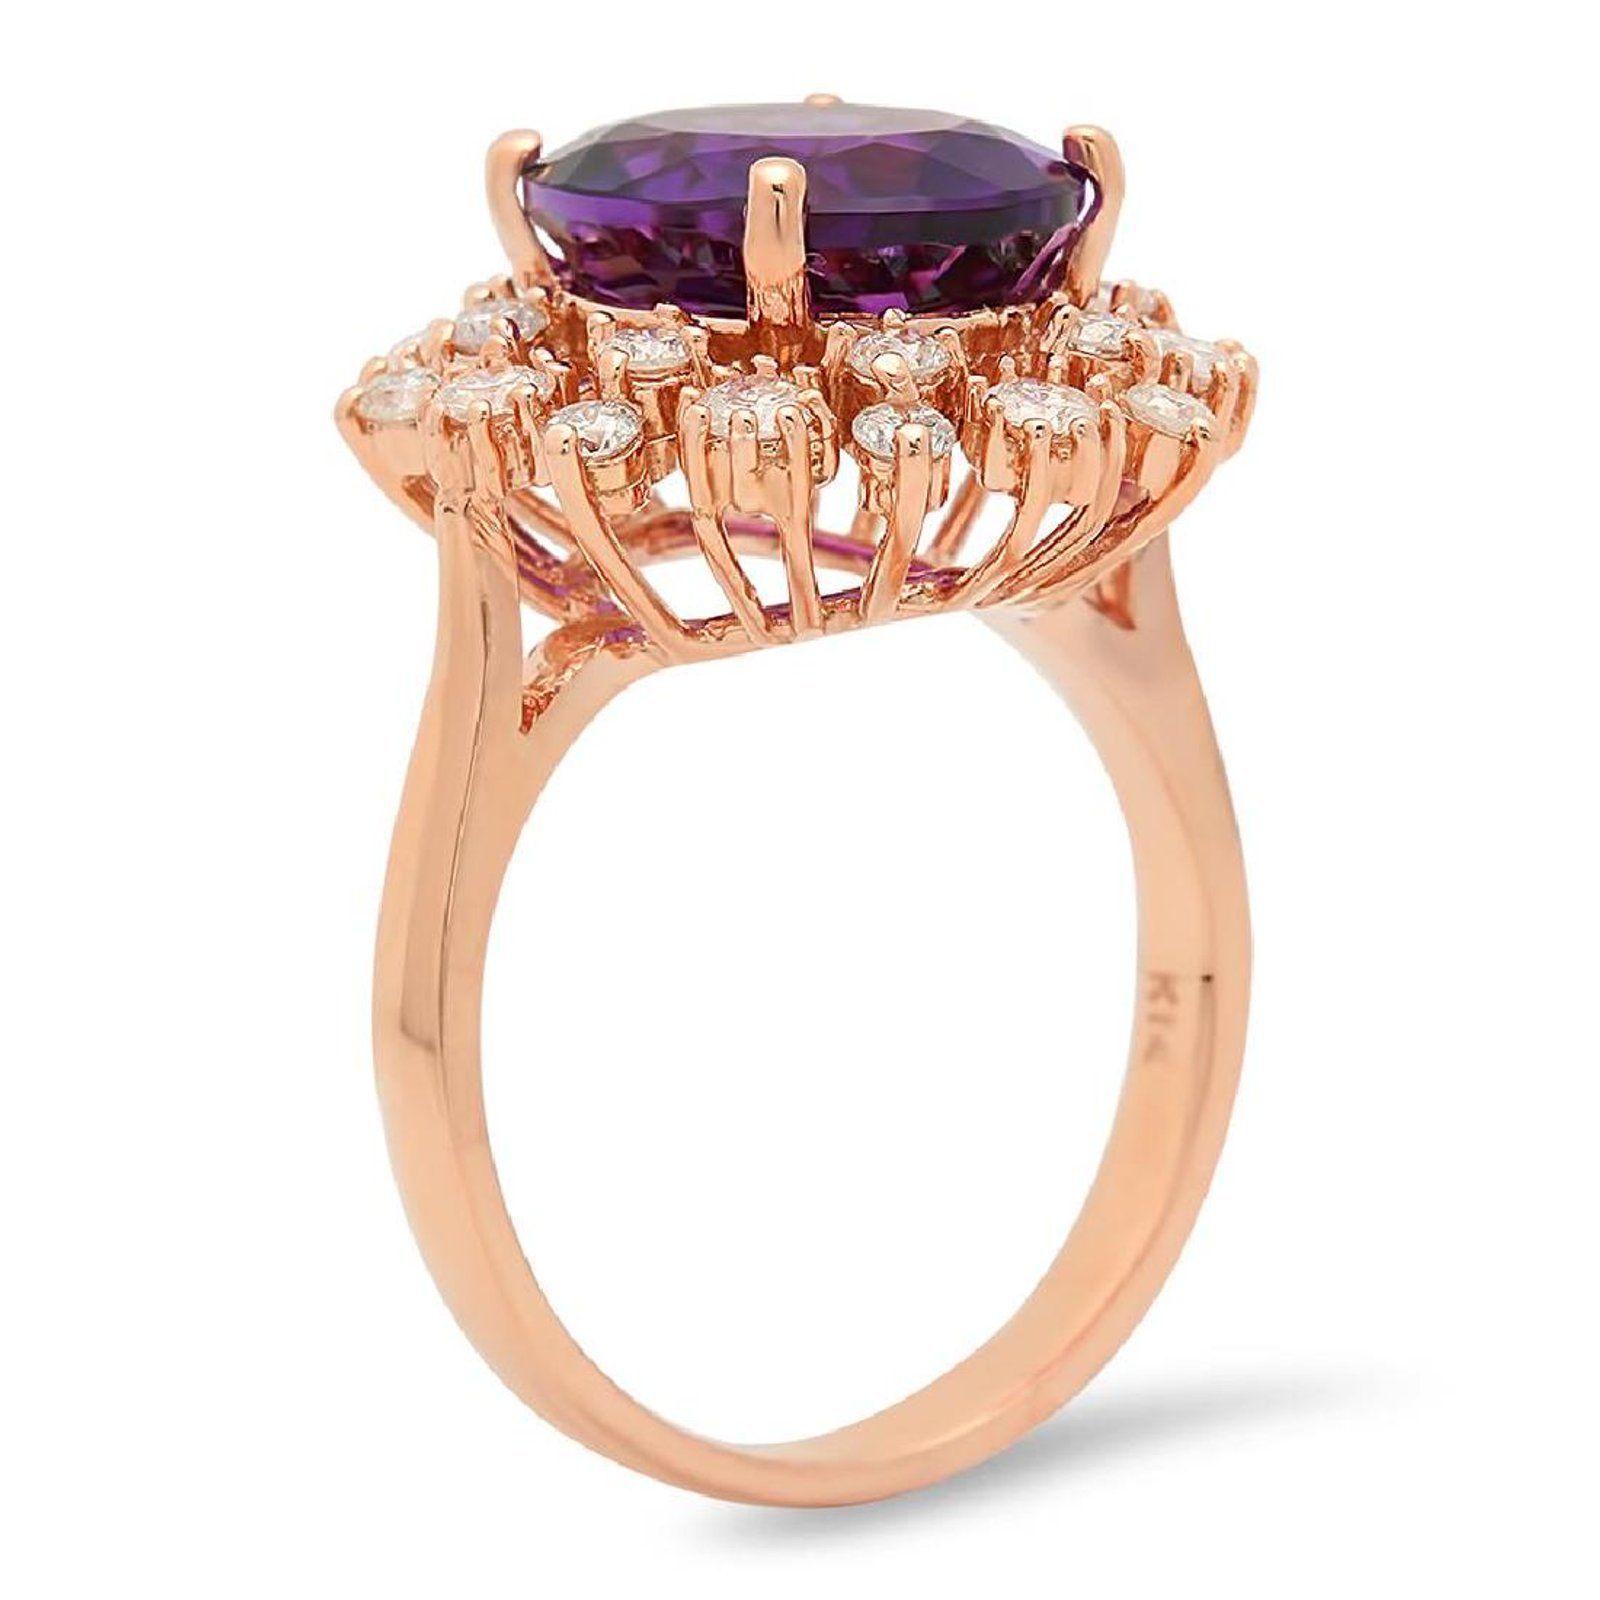 6.00 Carats Natural Amethyst and Diamond 14K Solid Rose Gold Ring

Total Natural Oval Cut Amethyst Weights: Approx. 5.00 Carats

Amethyst Measures: Approx. 12.00 x 10.00mm

Natural Round Diamonds Weight: Approx. 1.00 Carats (color G-H / Clarity